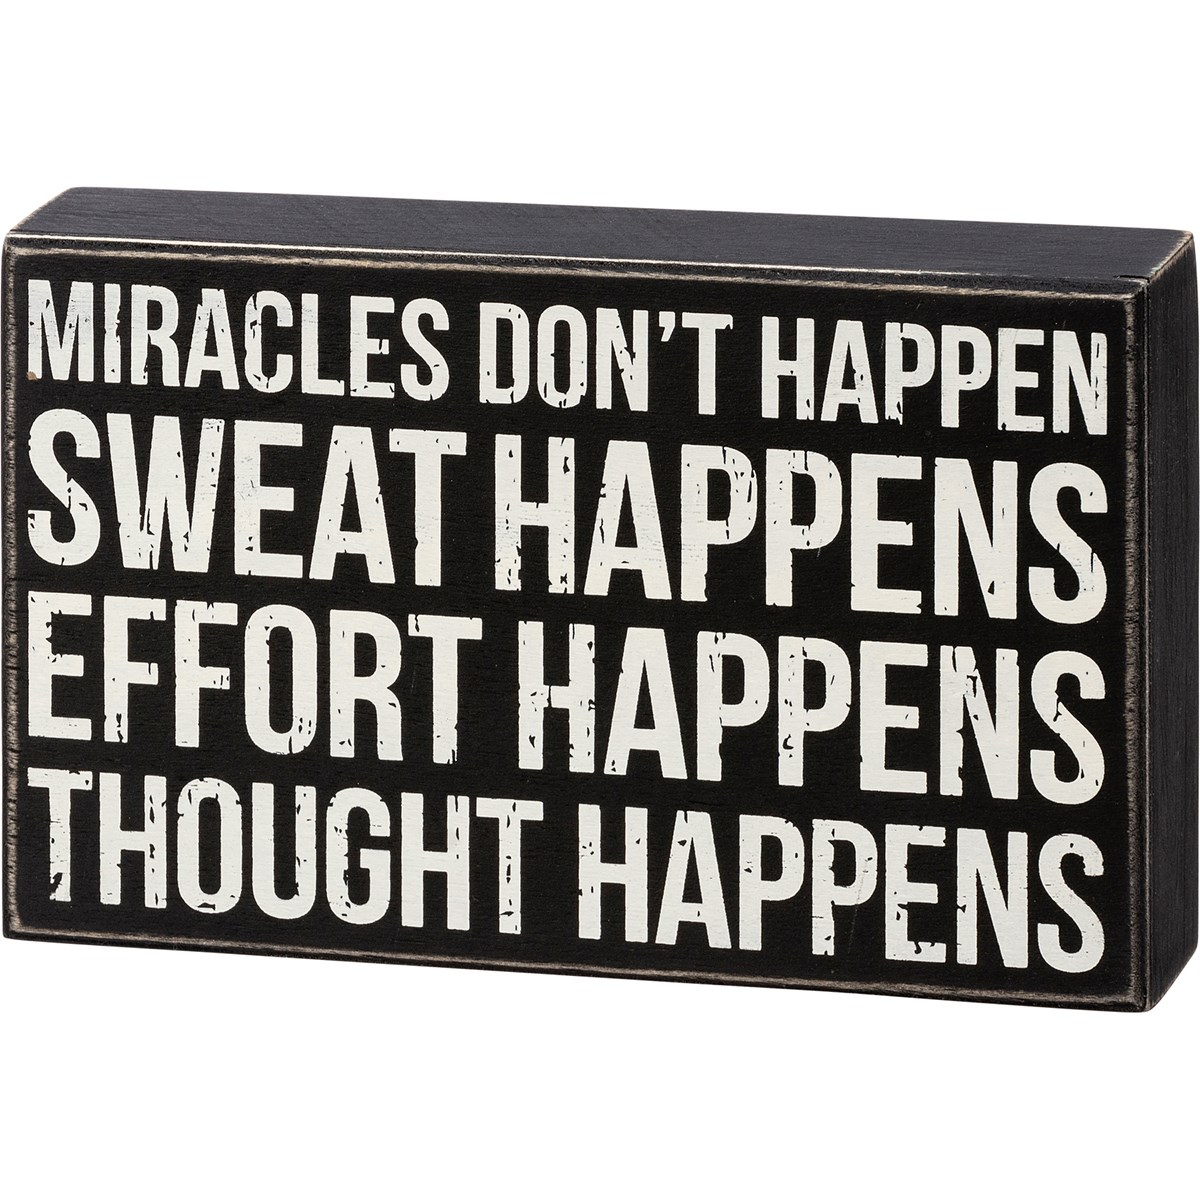 Thought Happens Box Sign - Wood